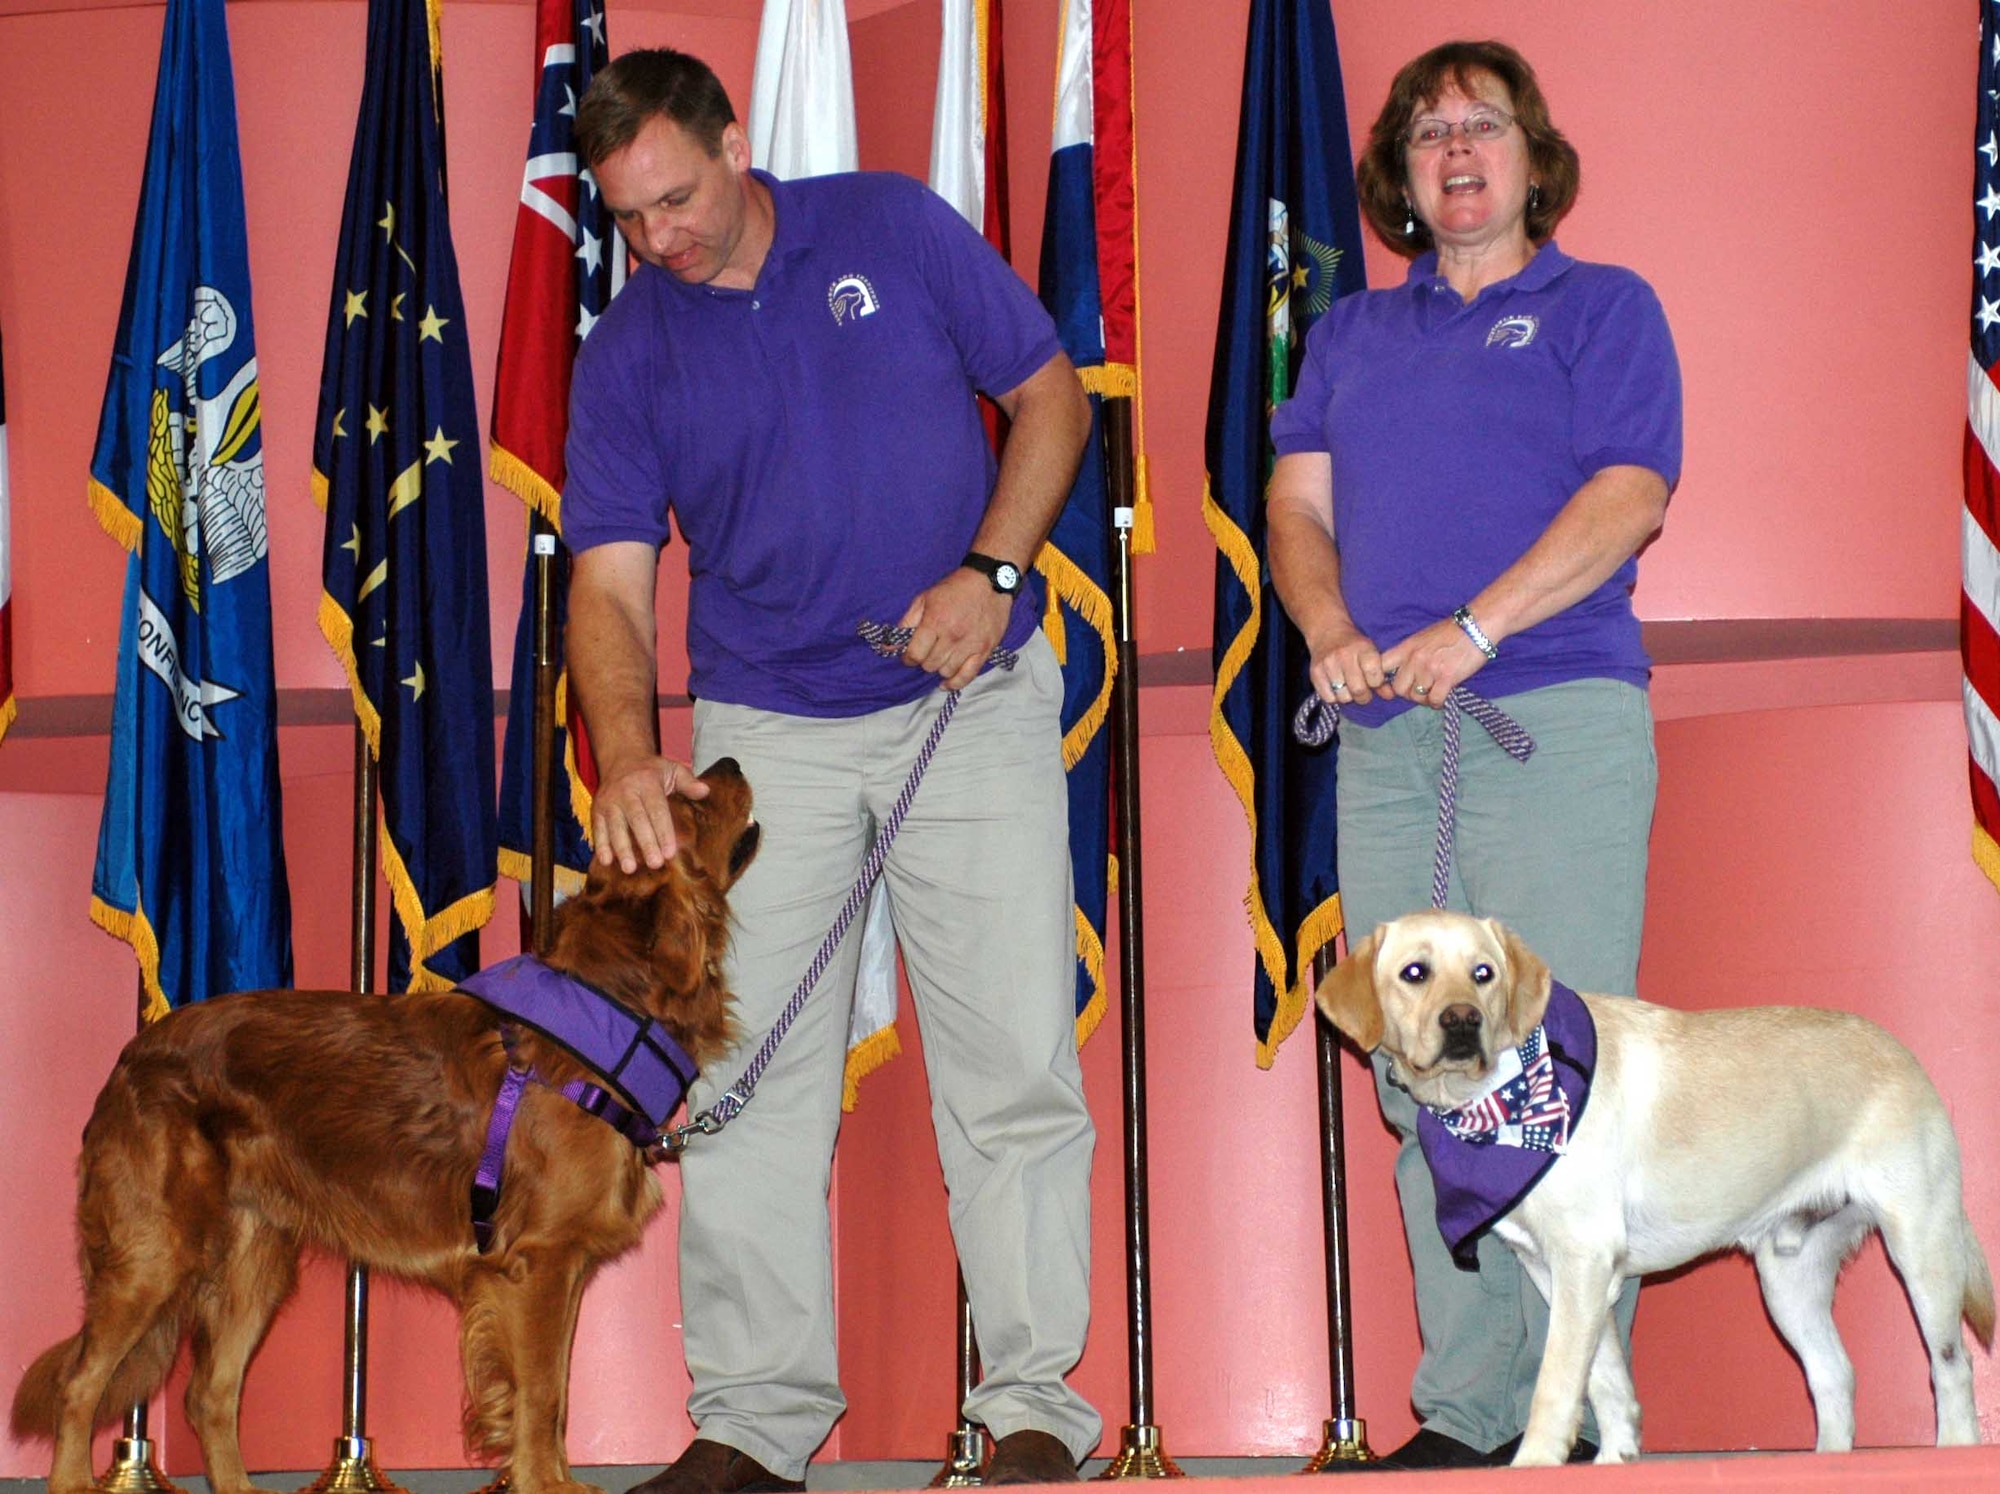 Representatives from the Assistance Dog Institute present information about their charity during the 2007 Combined Federal Campaign kickoff event Oct. 15 at the David Grant USAF Medical Center’s auditorium. The CFC collects contributions from federal employees, including servicemembers, on behalf of different charitable organizations. (U.S. Air Force photo/Airman 1st Class Kristen Rohrer) 